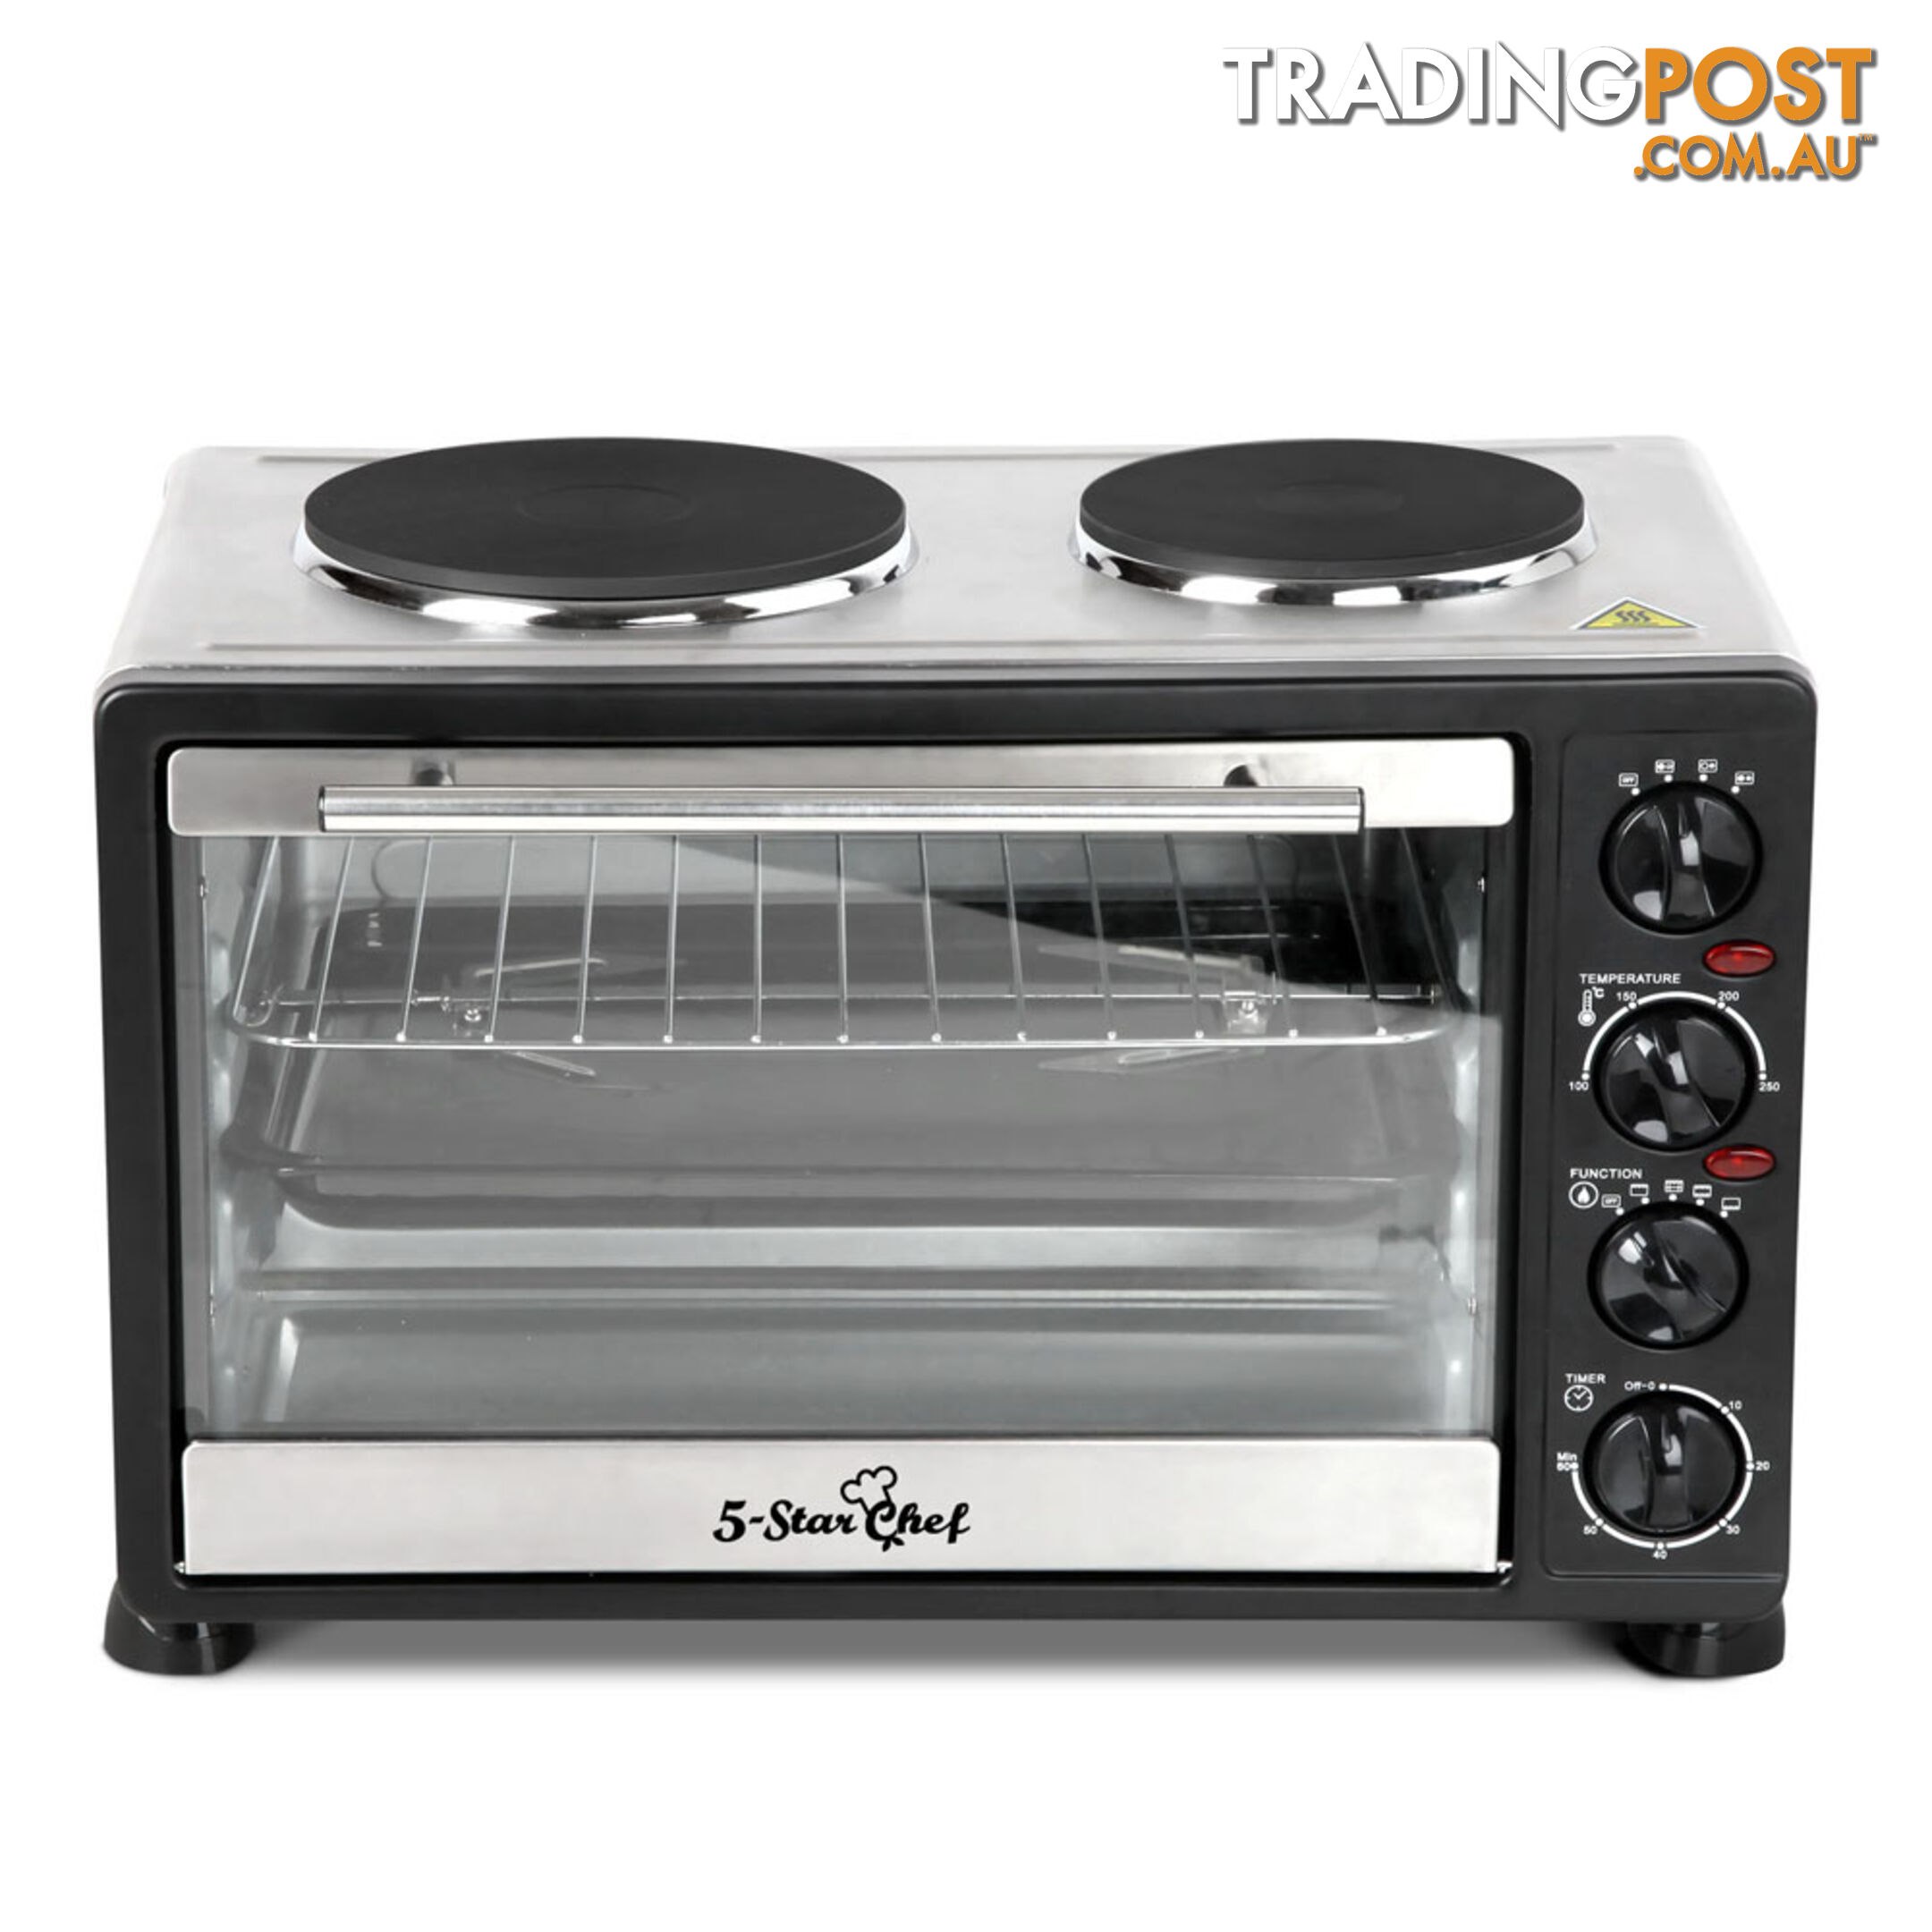 34L Benchtop Convection Oven with Twin Hot Plate